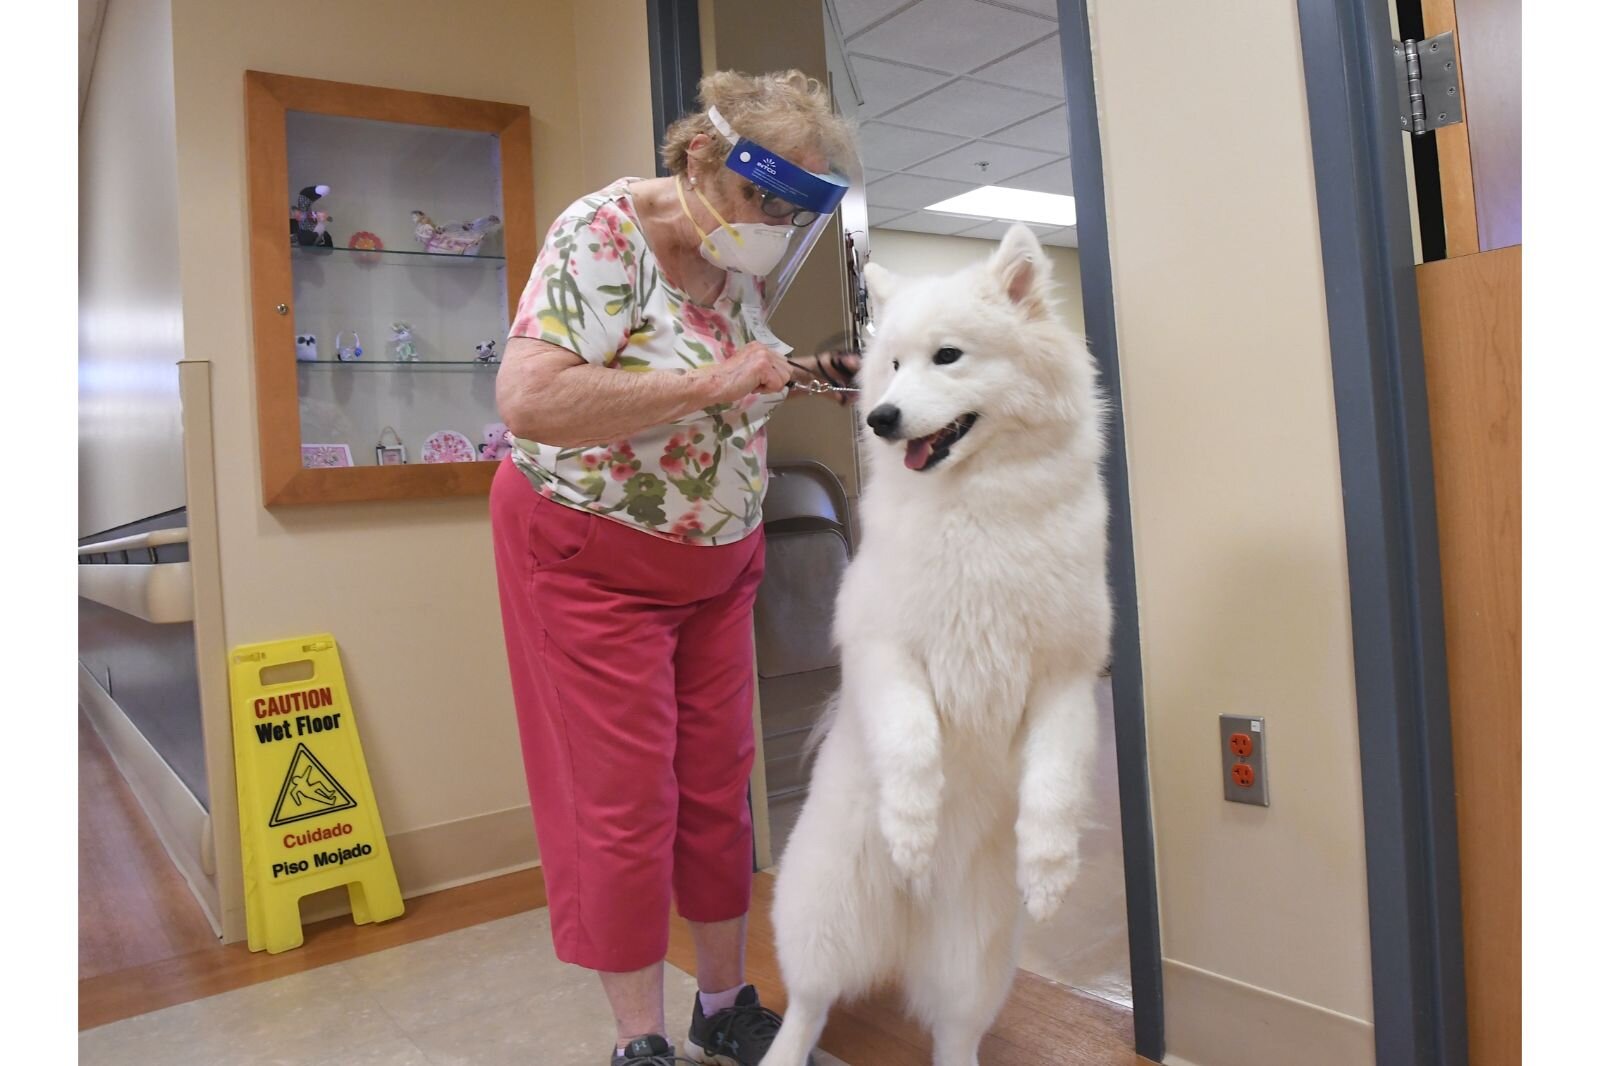 Carol Miller and Patty, her one-year old therapy dog, leave a patient’s room at the Calhoun County Medical Care Facility.